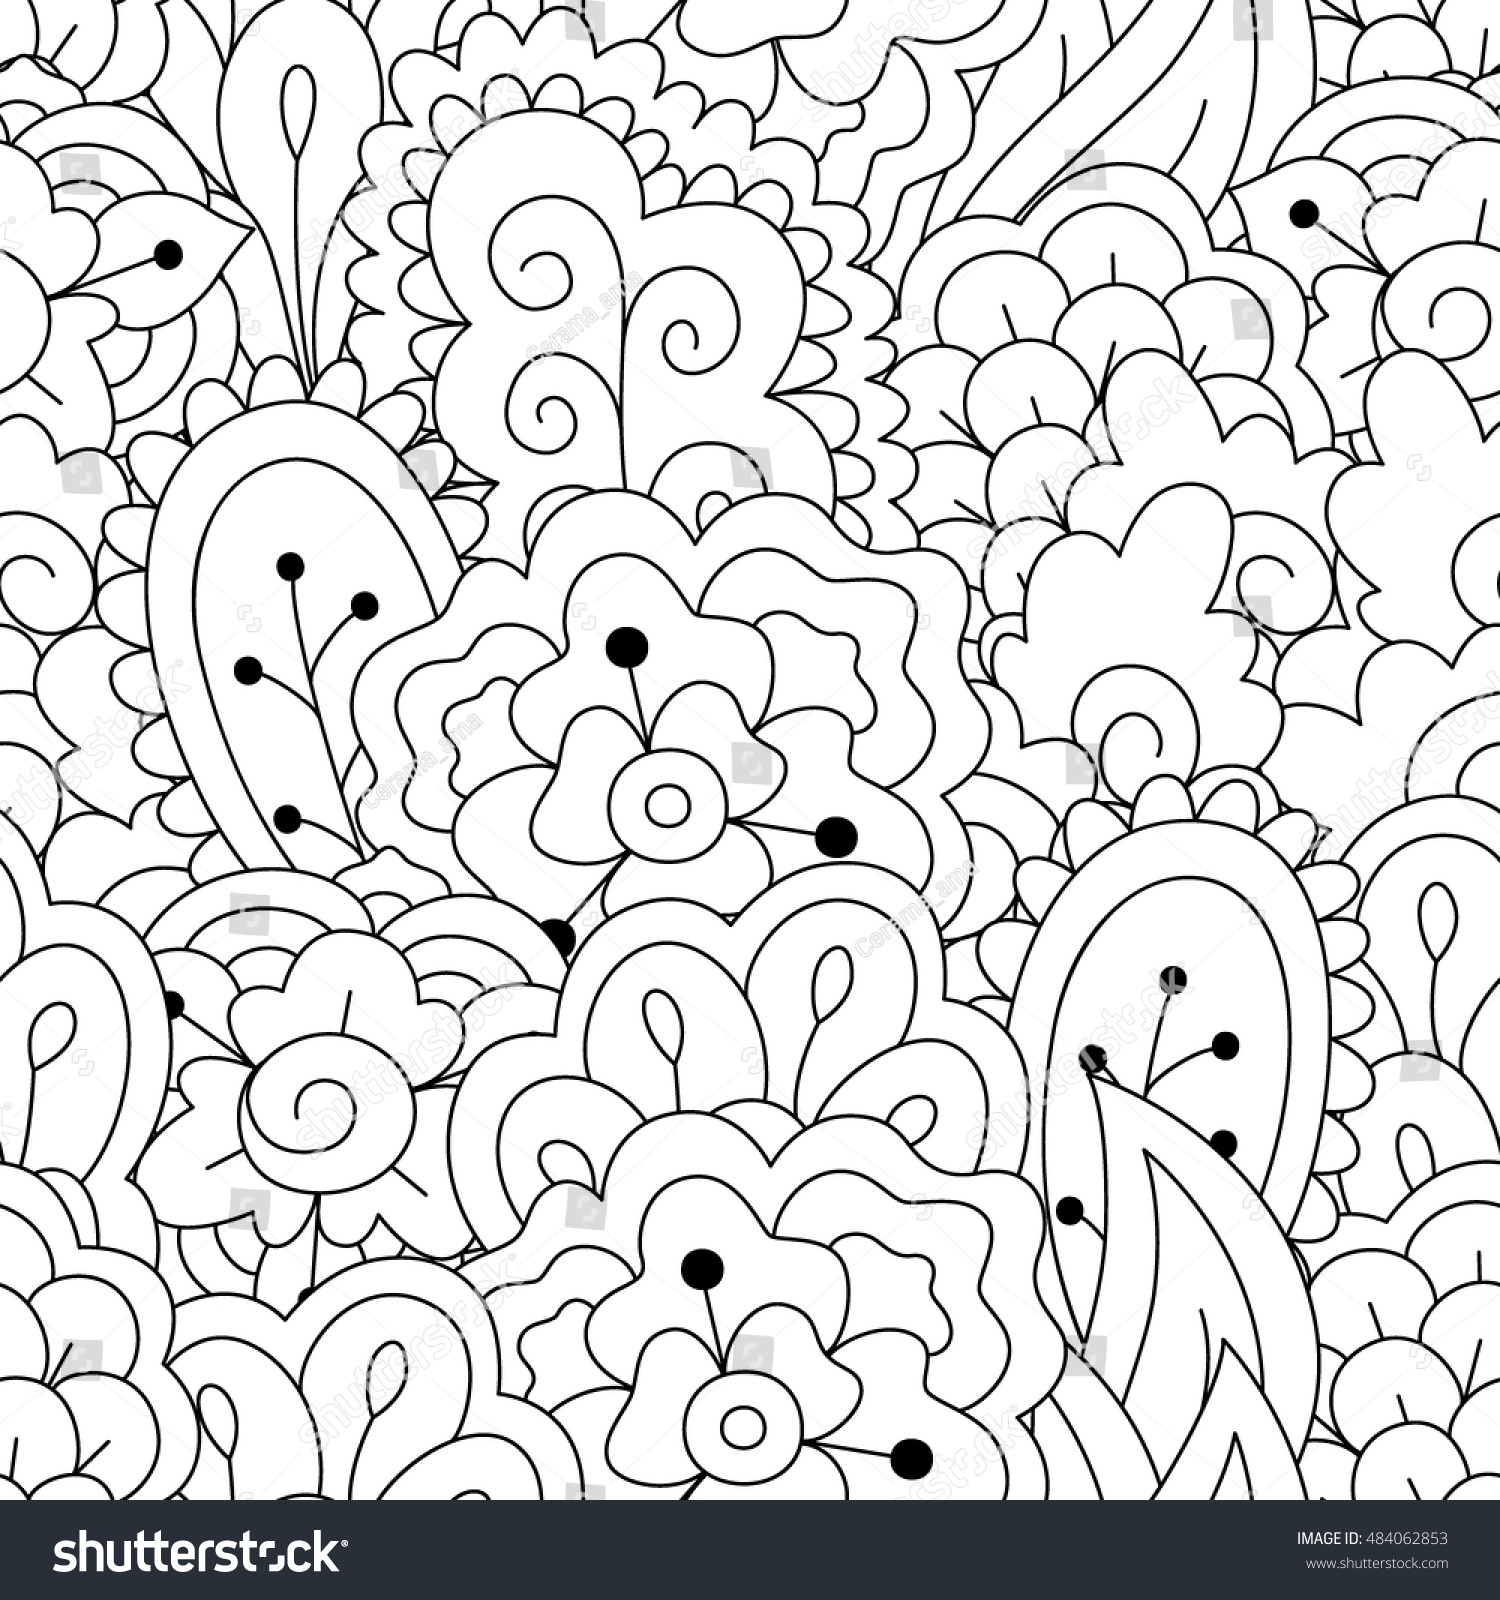 Seamless Black White Background Floral Ethnic Stock Vector (Royalty ...